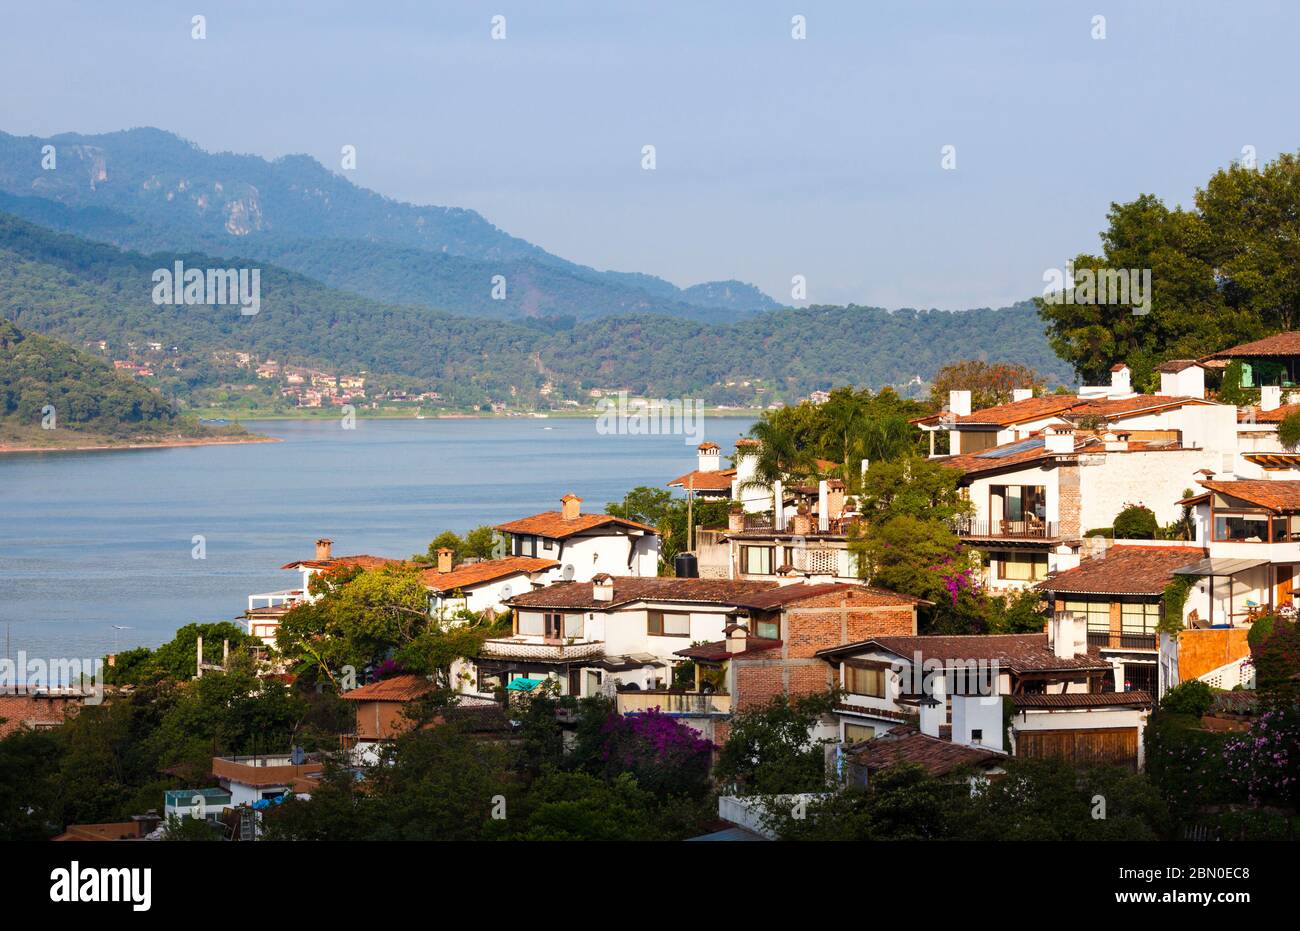 Tiled roof houses along the lake in tranquil Valle de Bravo in the state of Mexico, Mexico. Stock Photo